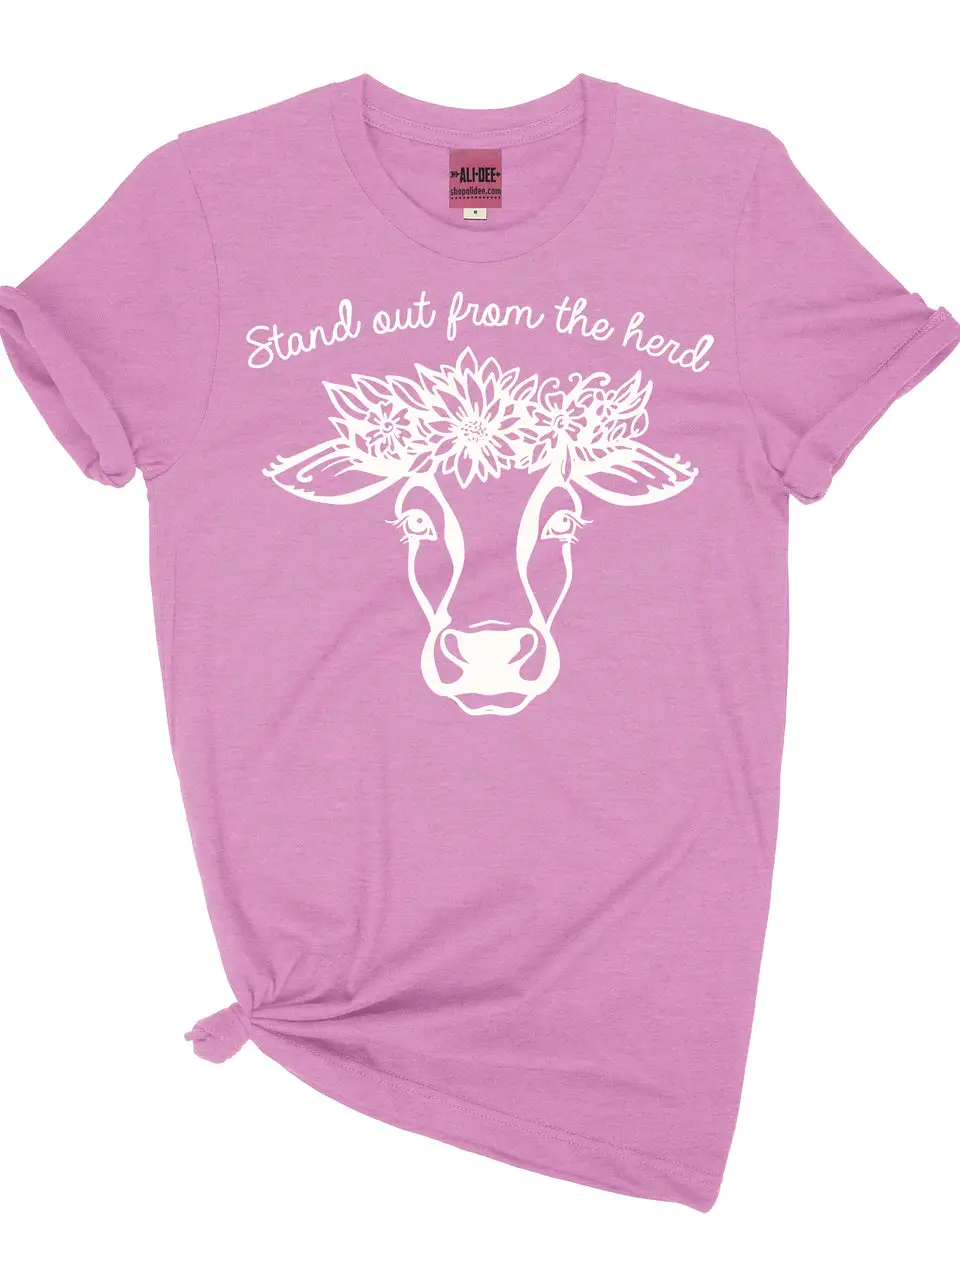 SALE Tee - Stand Out From The Herd